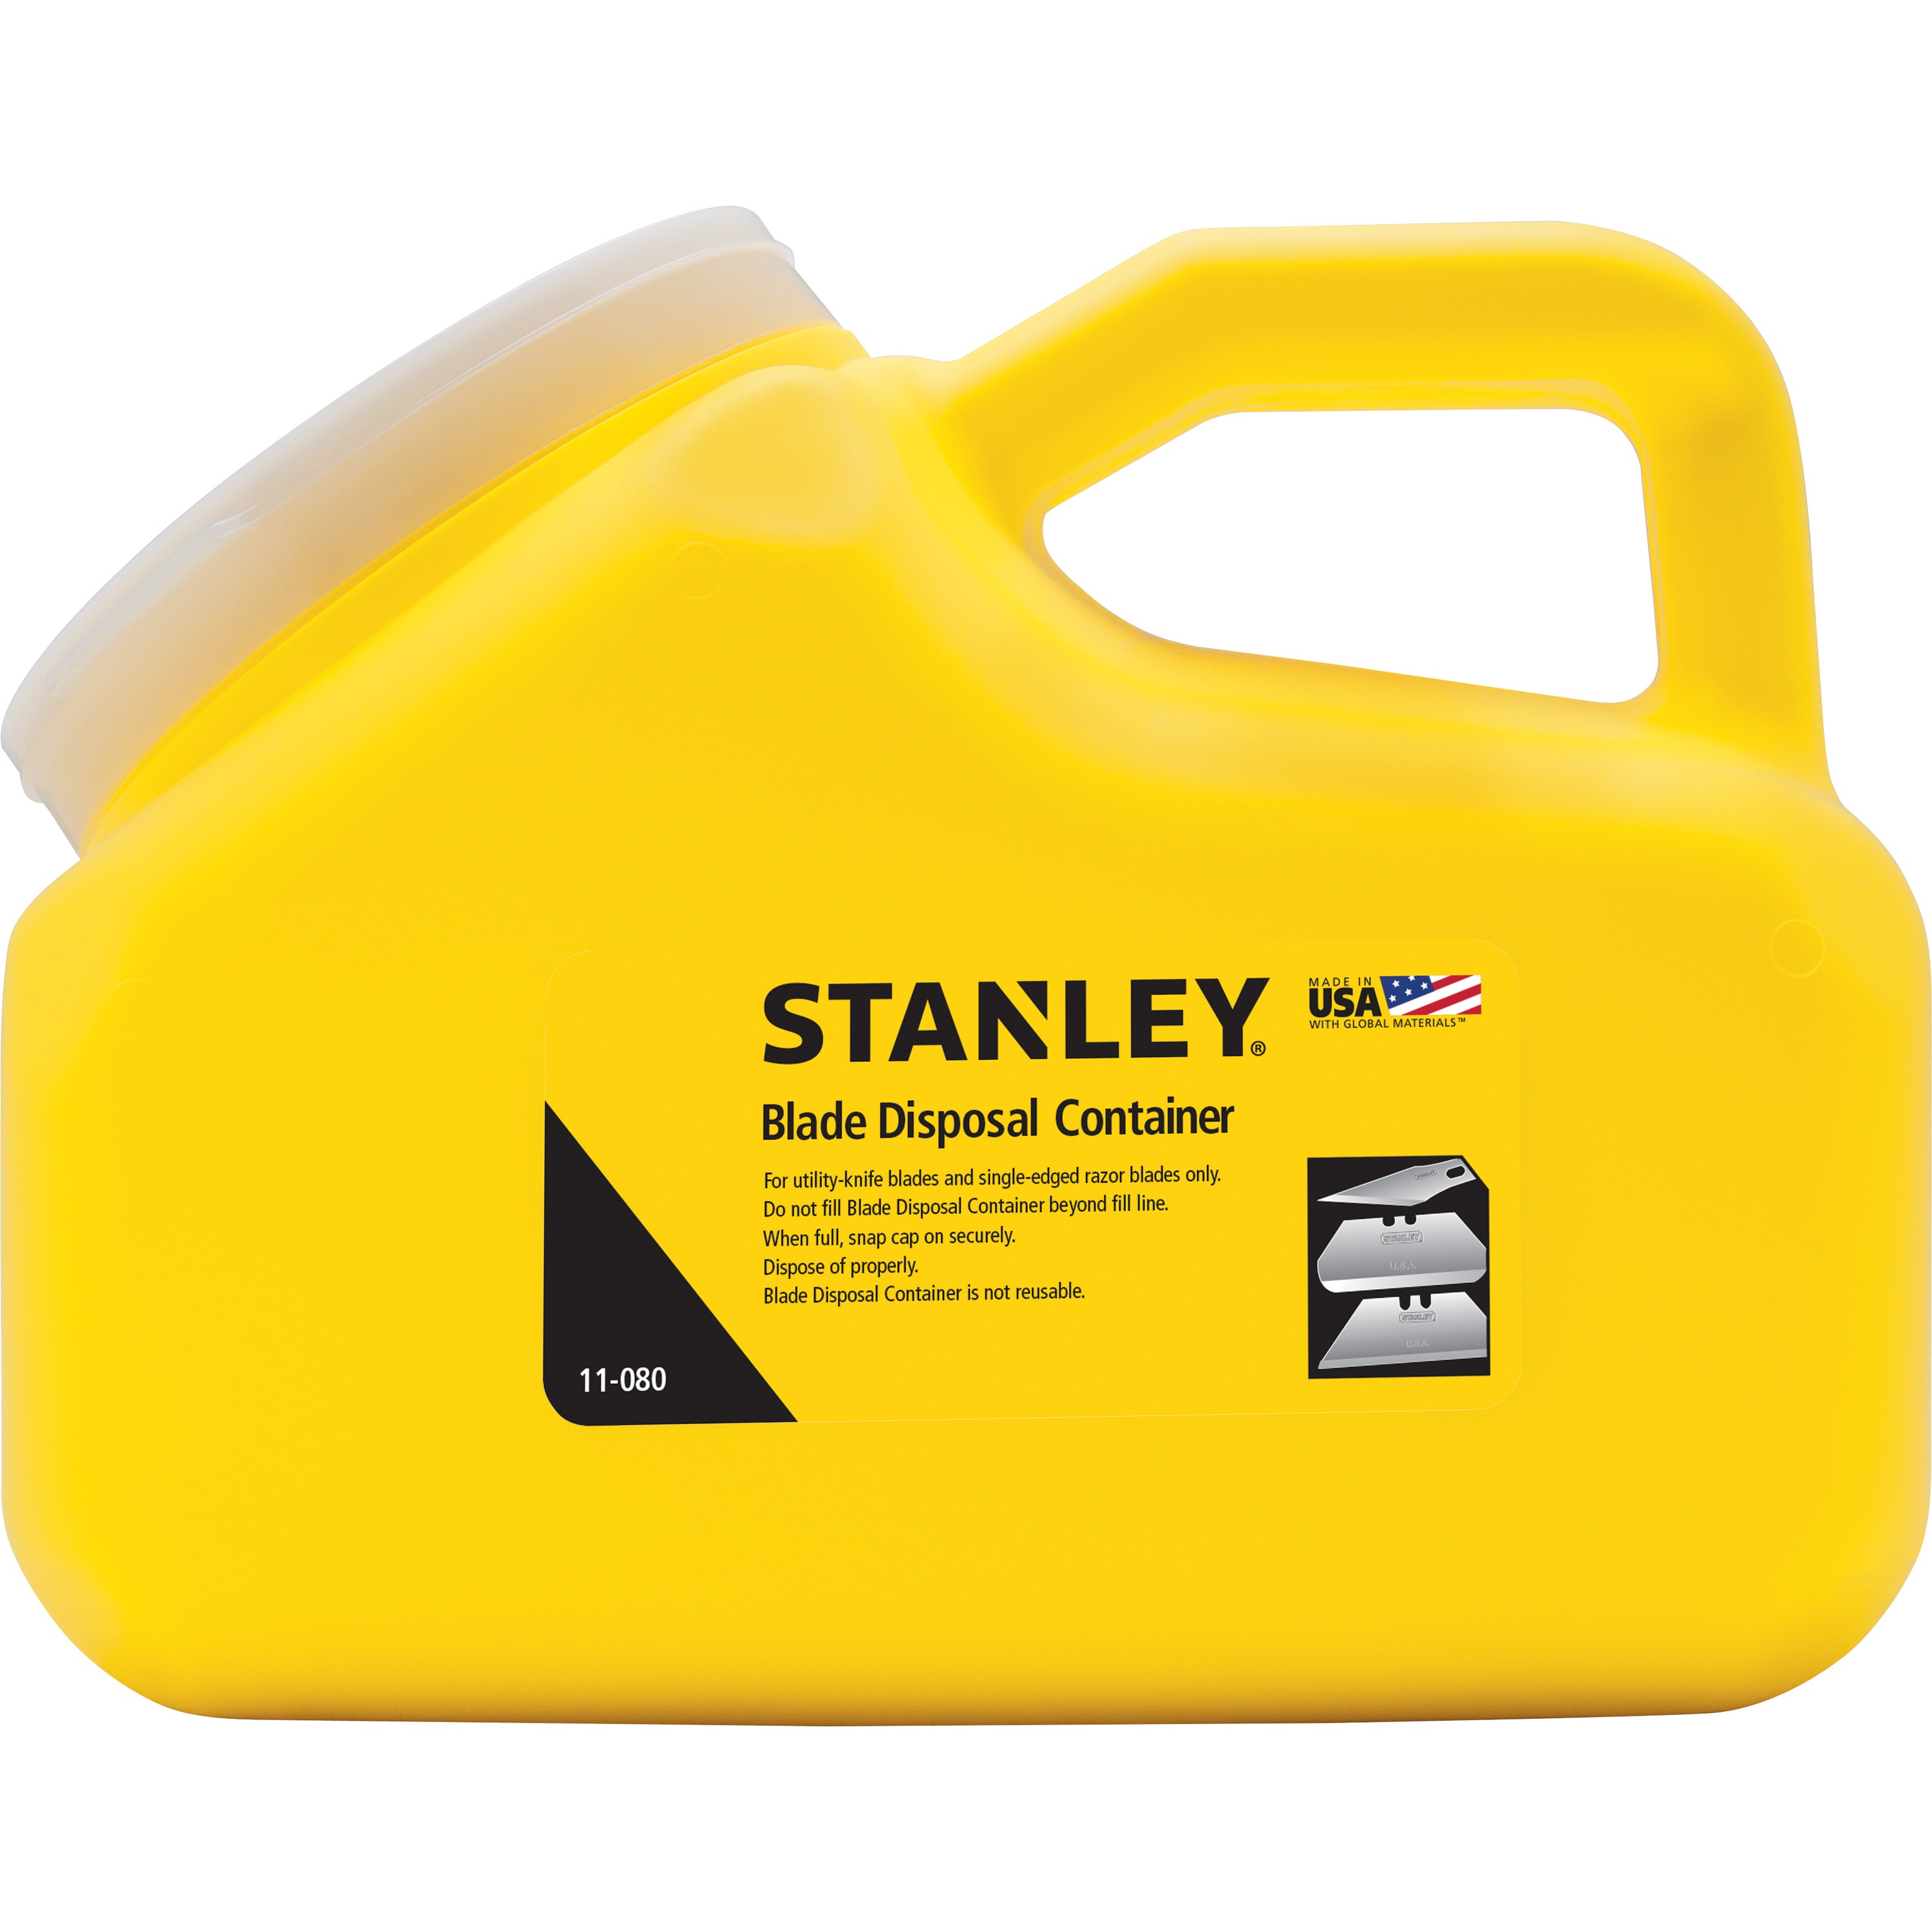 Stanley Tools - Blade Disposal Container - 11-080